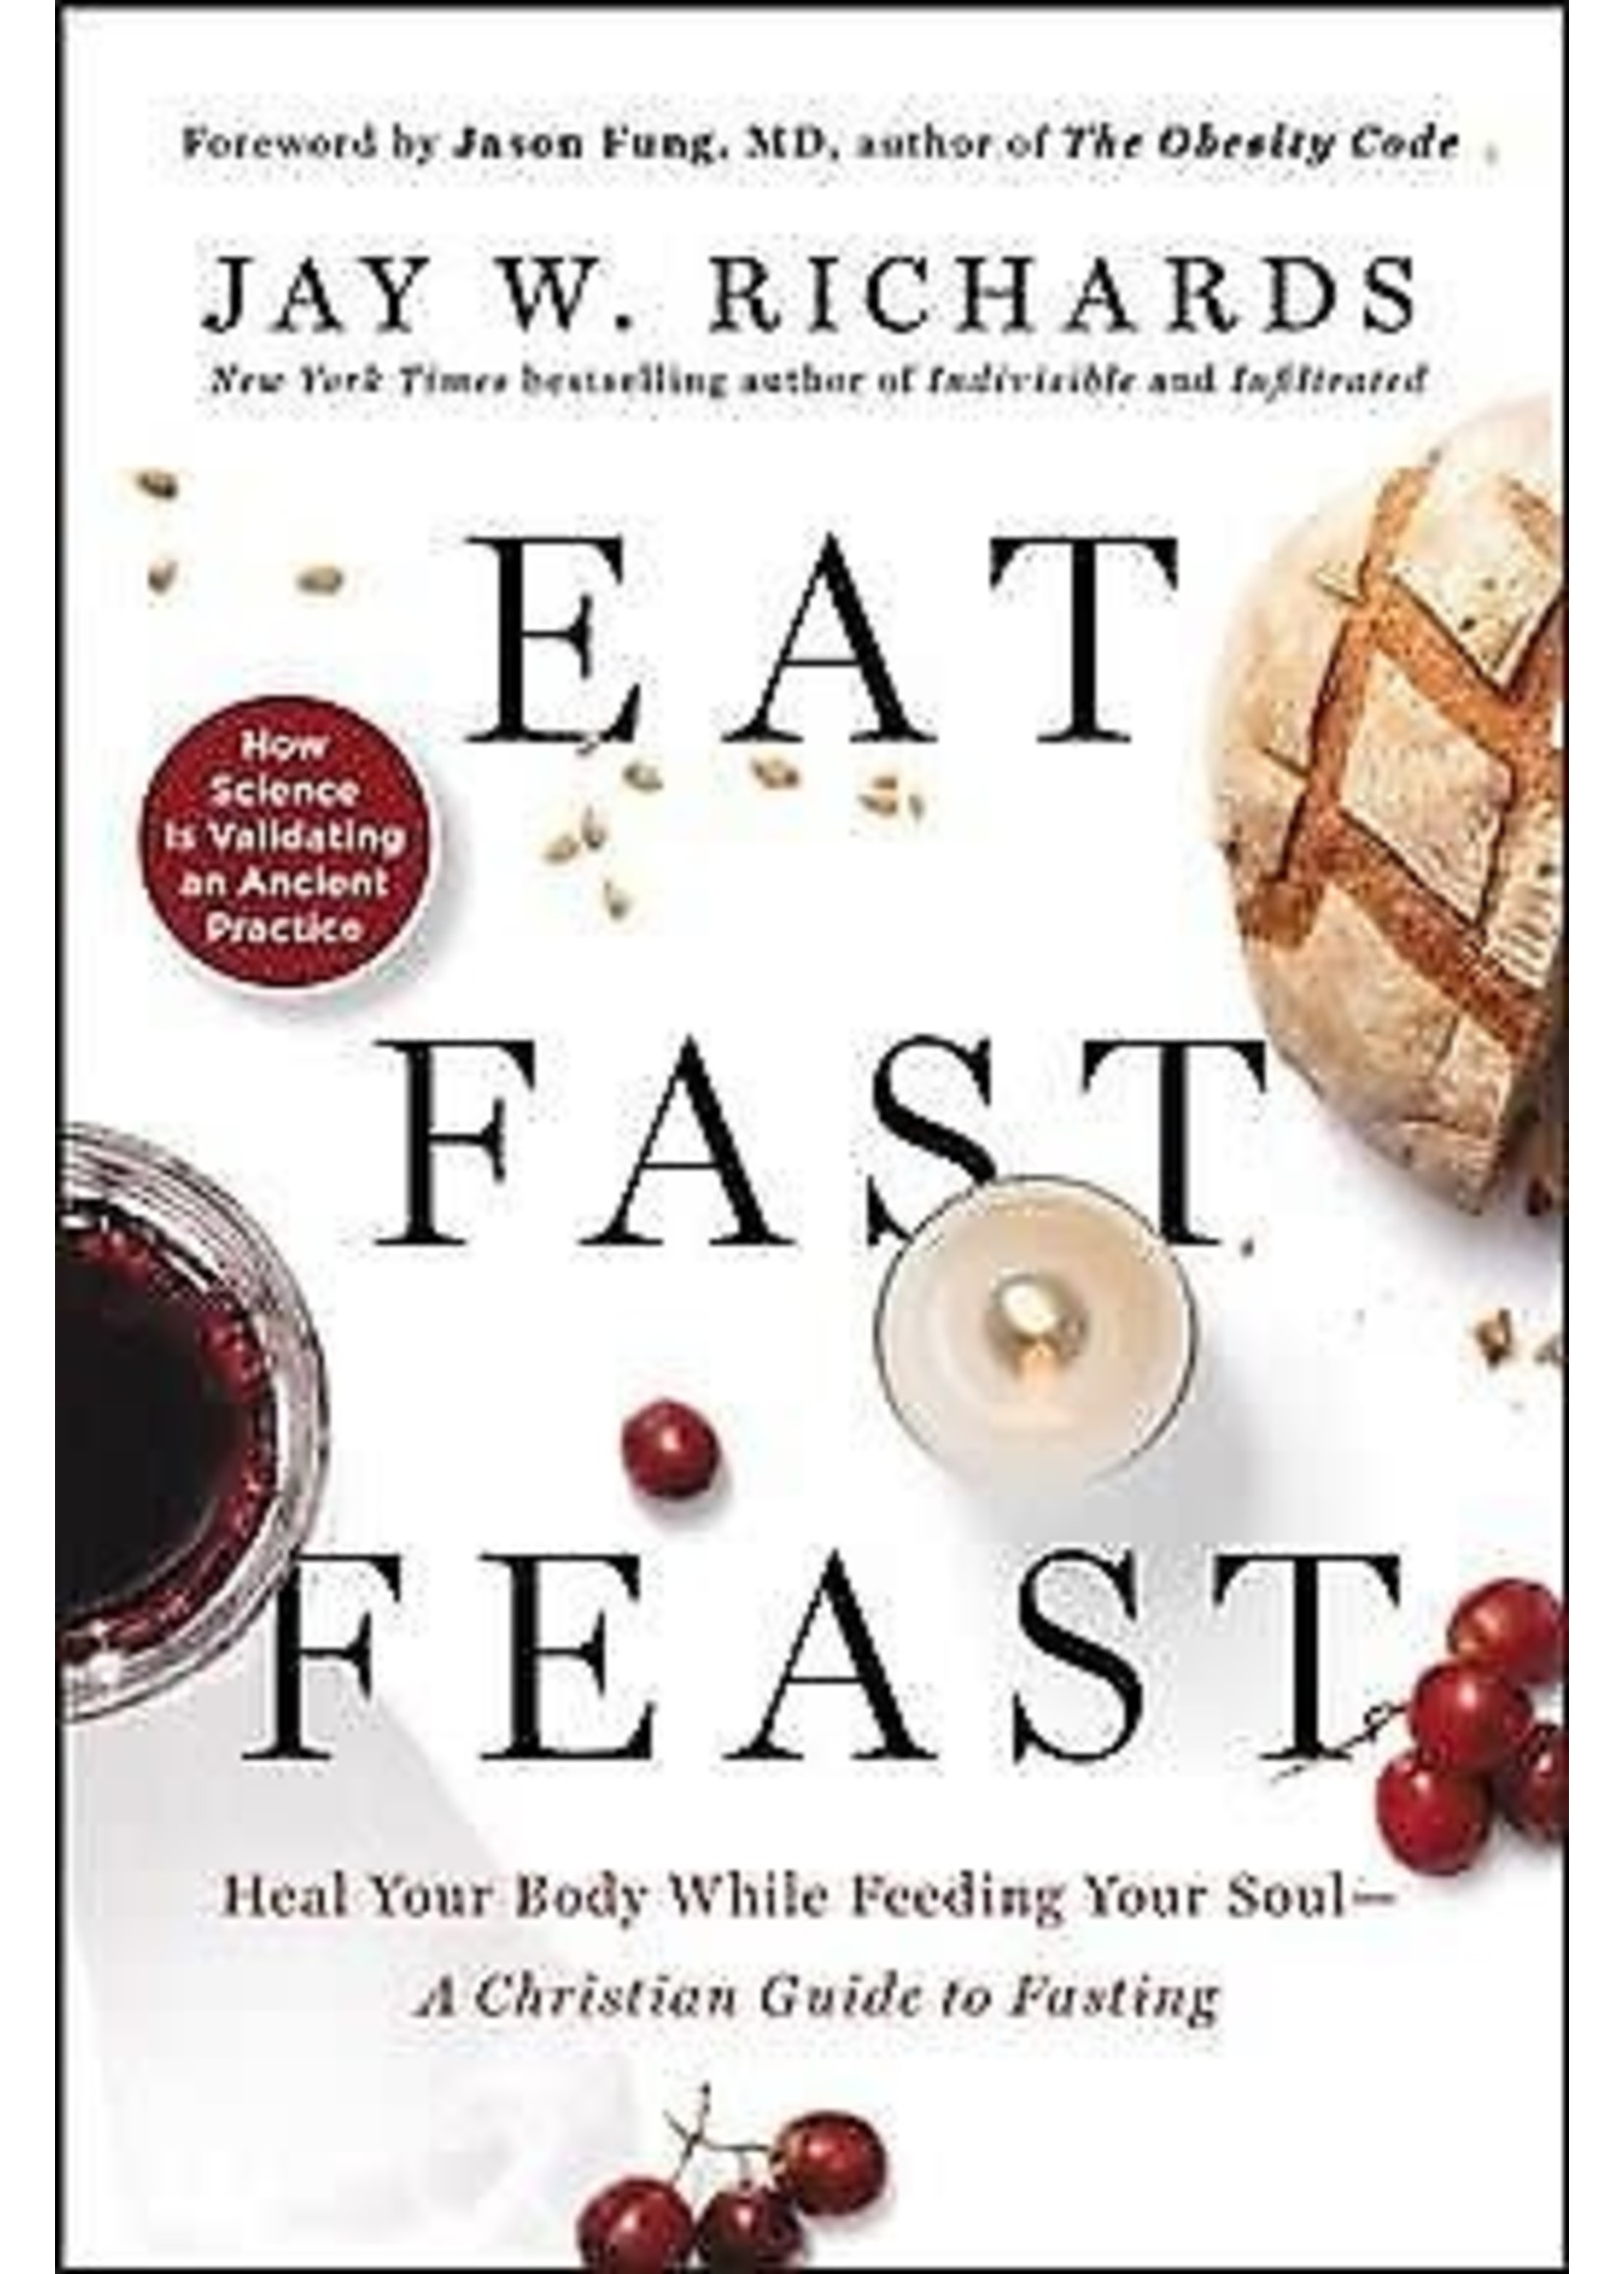 Eat, Fast, Feast: Heal Your Body While Feeding Your Soul―A Christian Guide to Fasting